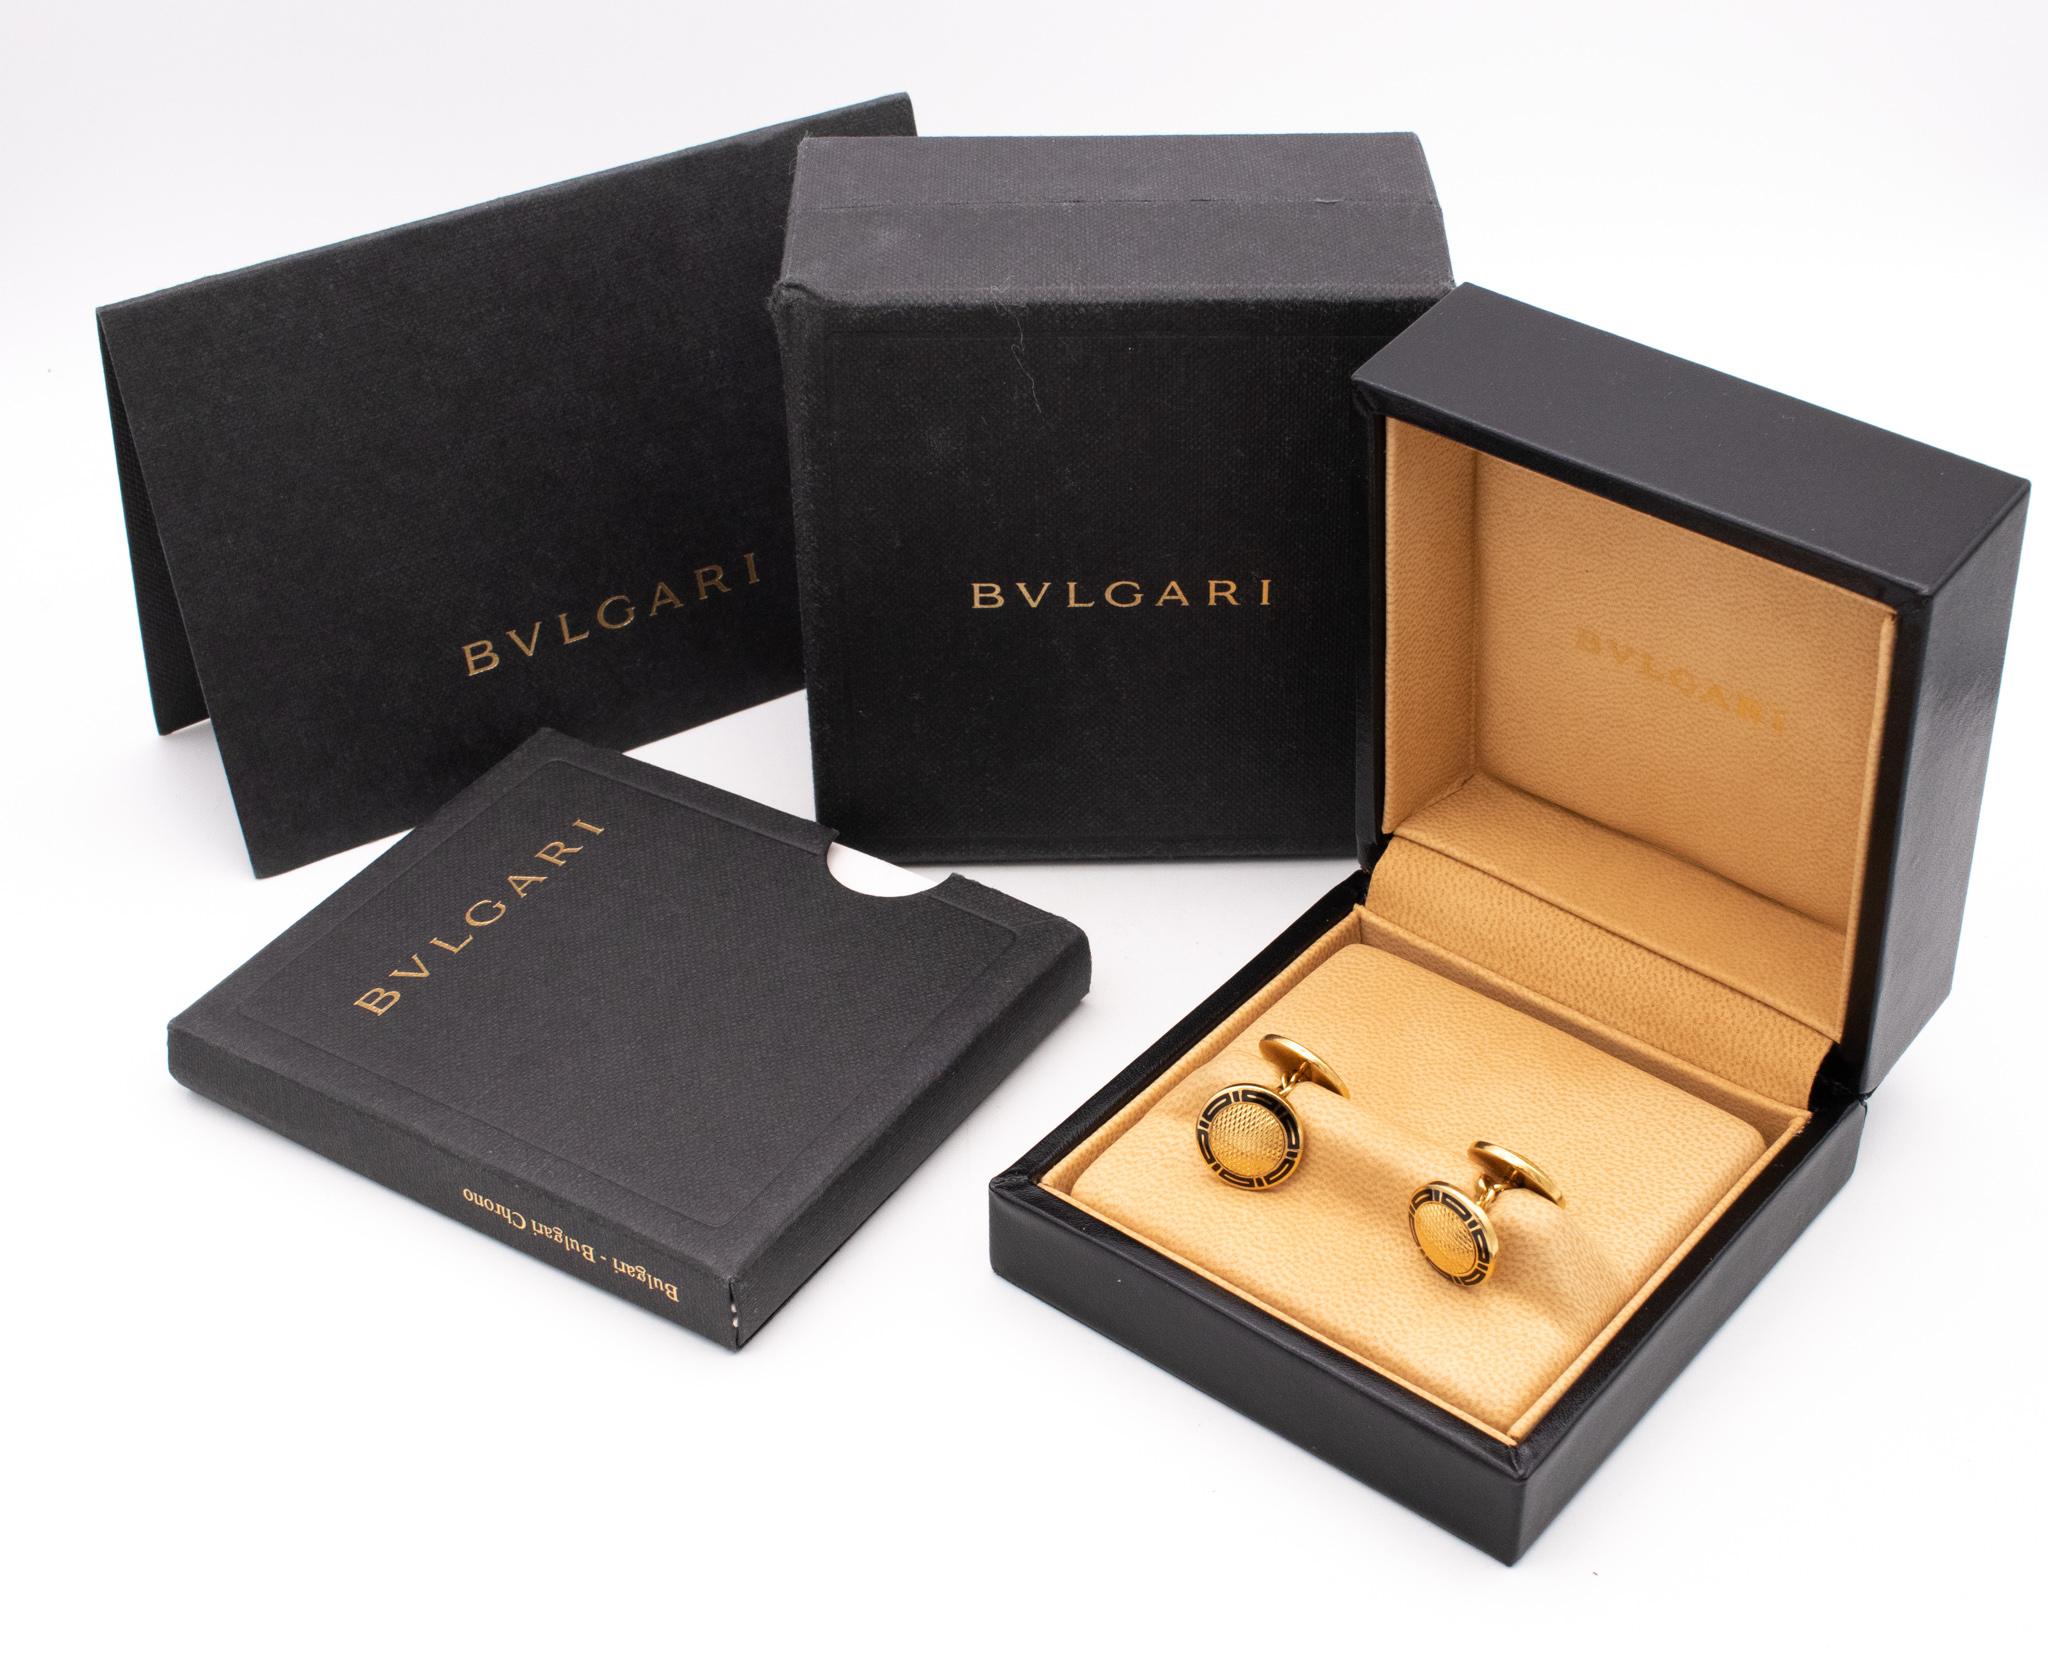 Beautiful Art-Deco cufflinks designed by Bvlgari.

Great elegant pair crafted in Rome, Italy in solid 18 karats of textured yellow gold. They are embellished with a Greek-Etruscan geometric pattern accents and decorated, with applications of black